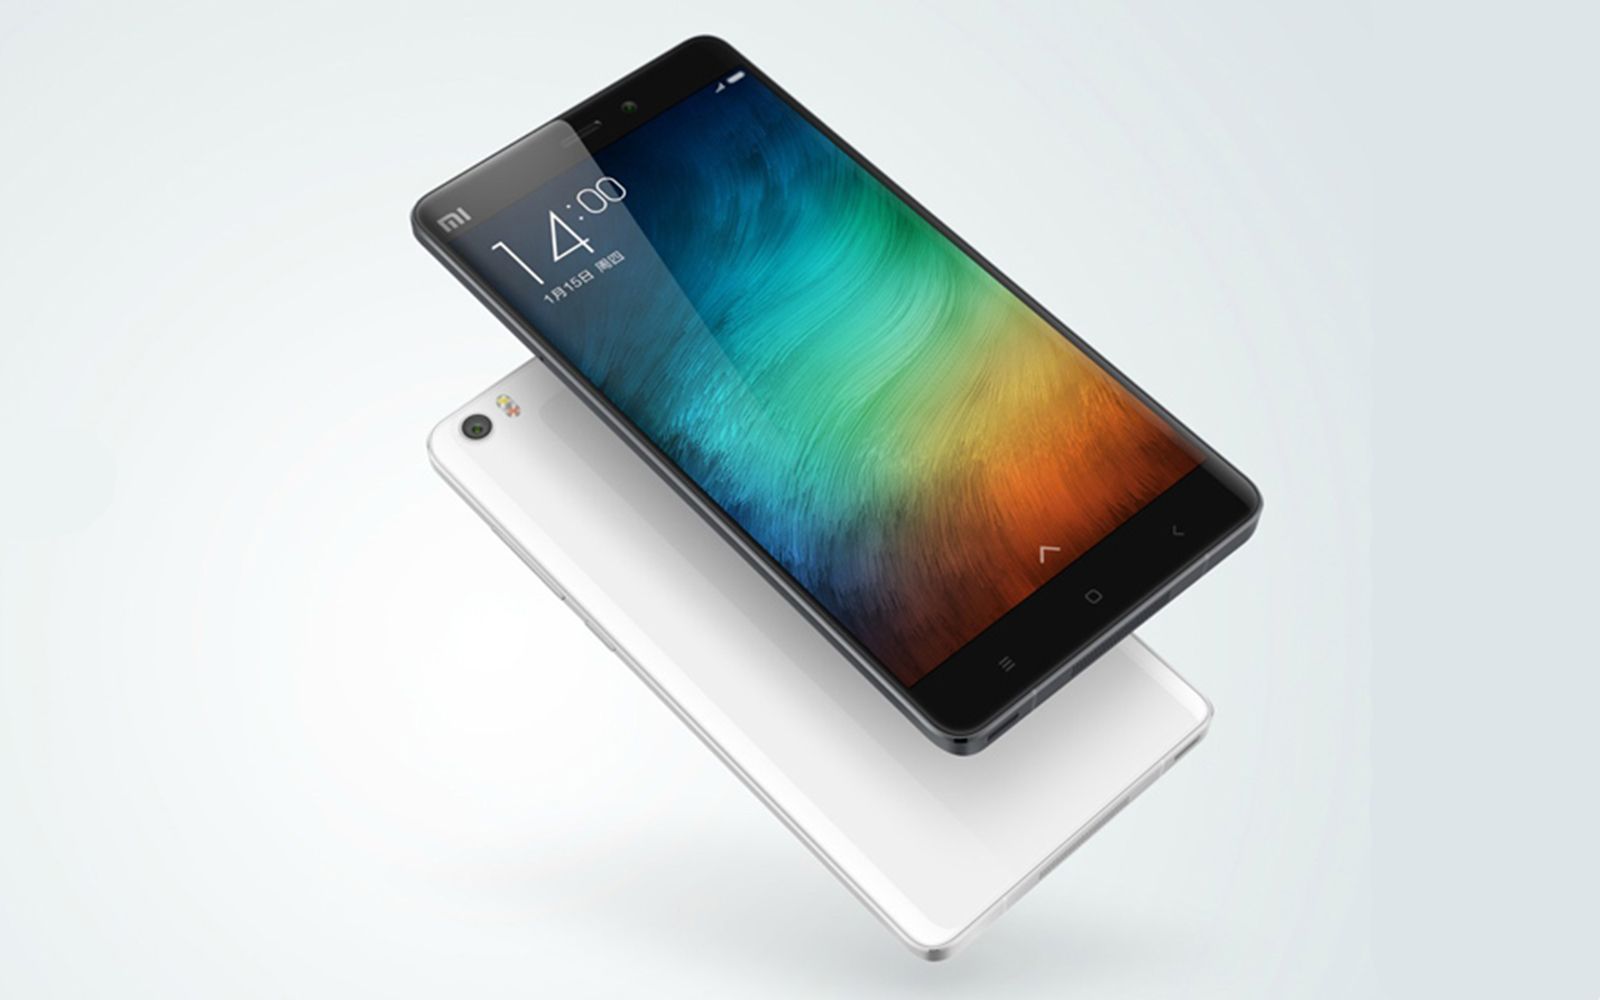 xiaomi mi note could be iphone 6 plus beater qhd snapdragon 810 cat 9 lte for 350 image 1